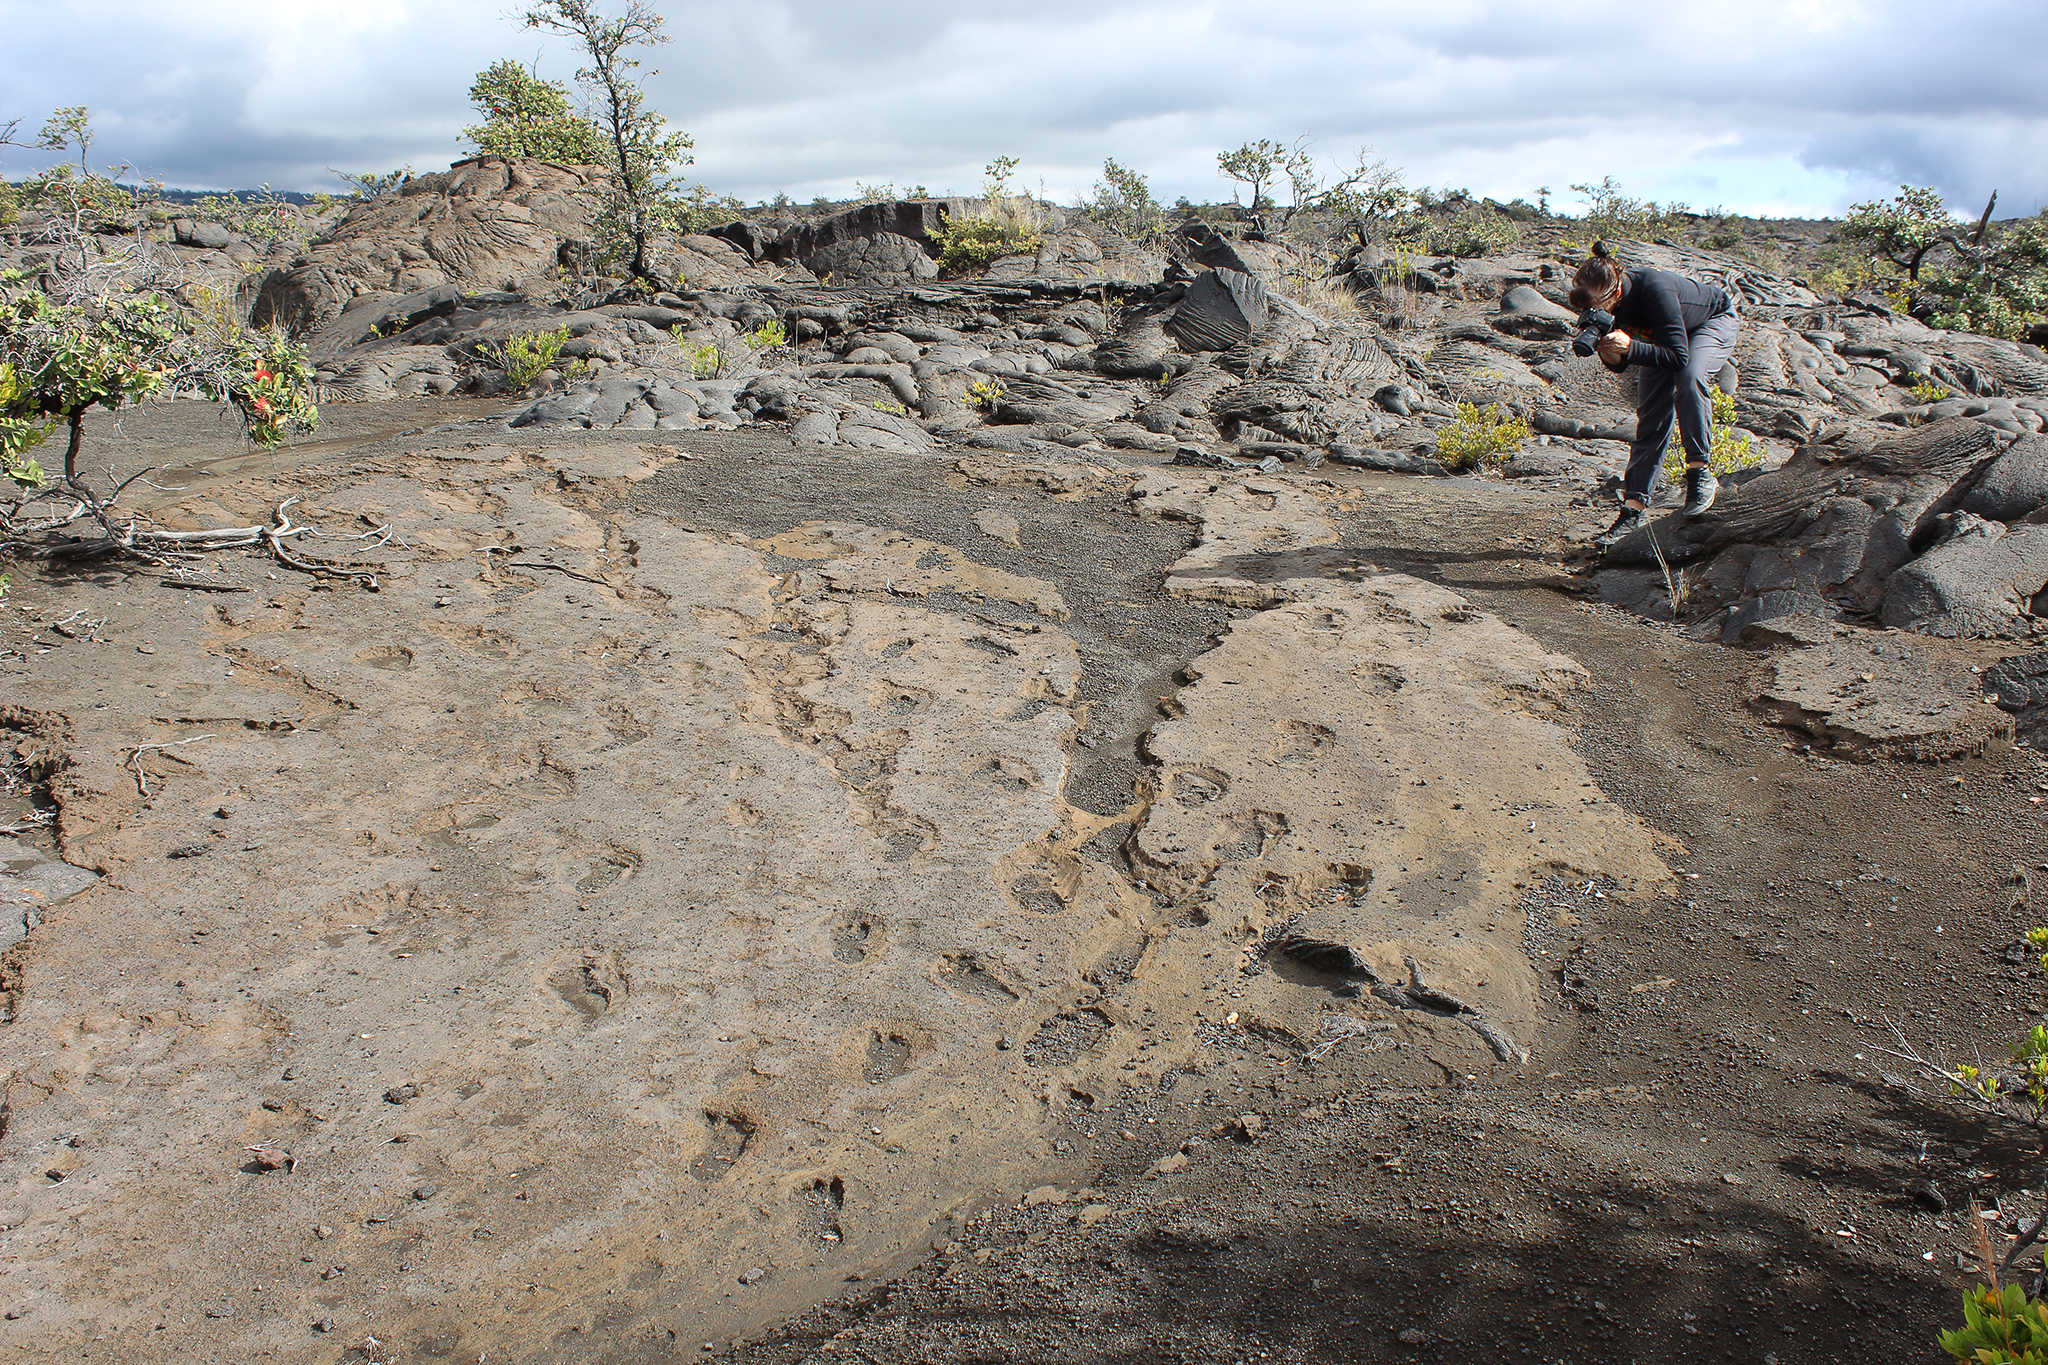 The mysterious Hawaii footprints fossilized in volcanic ash